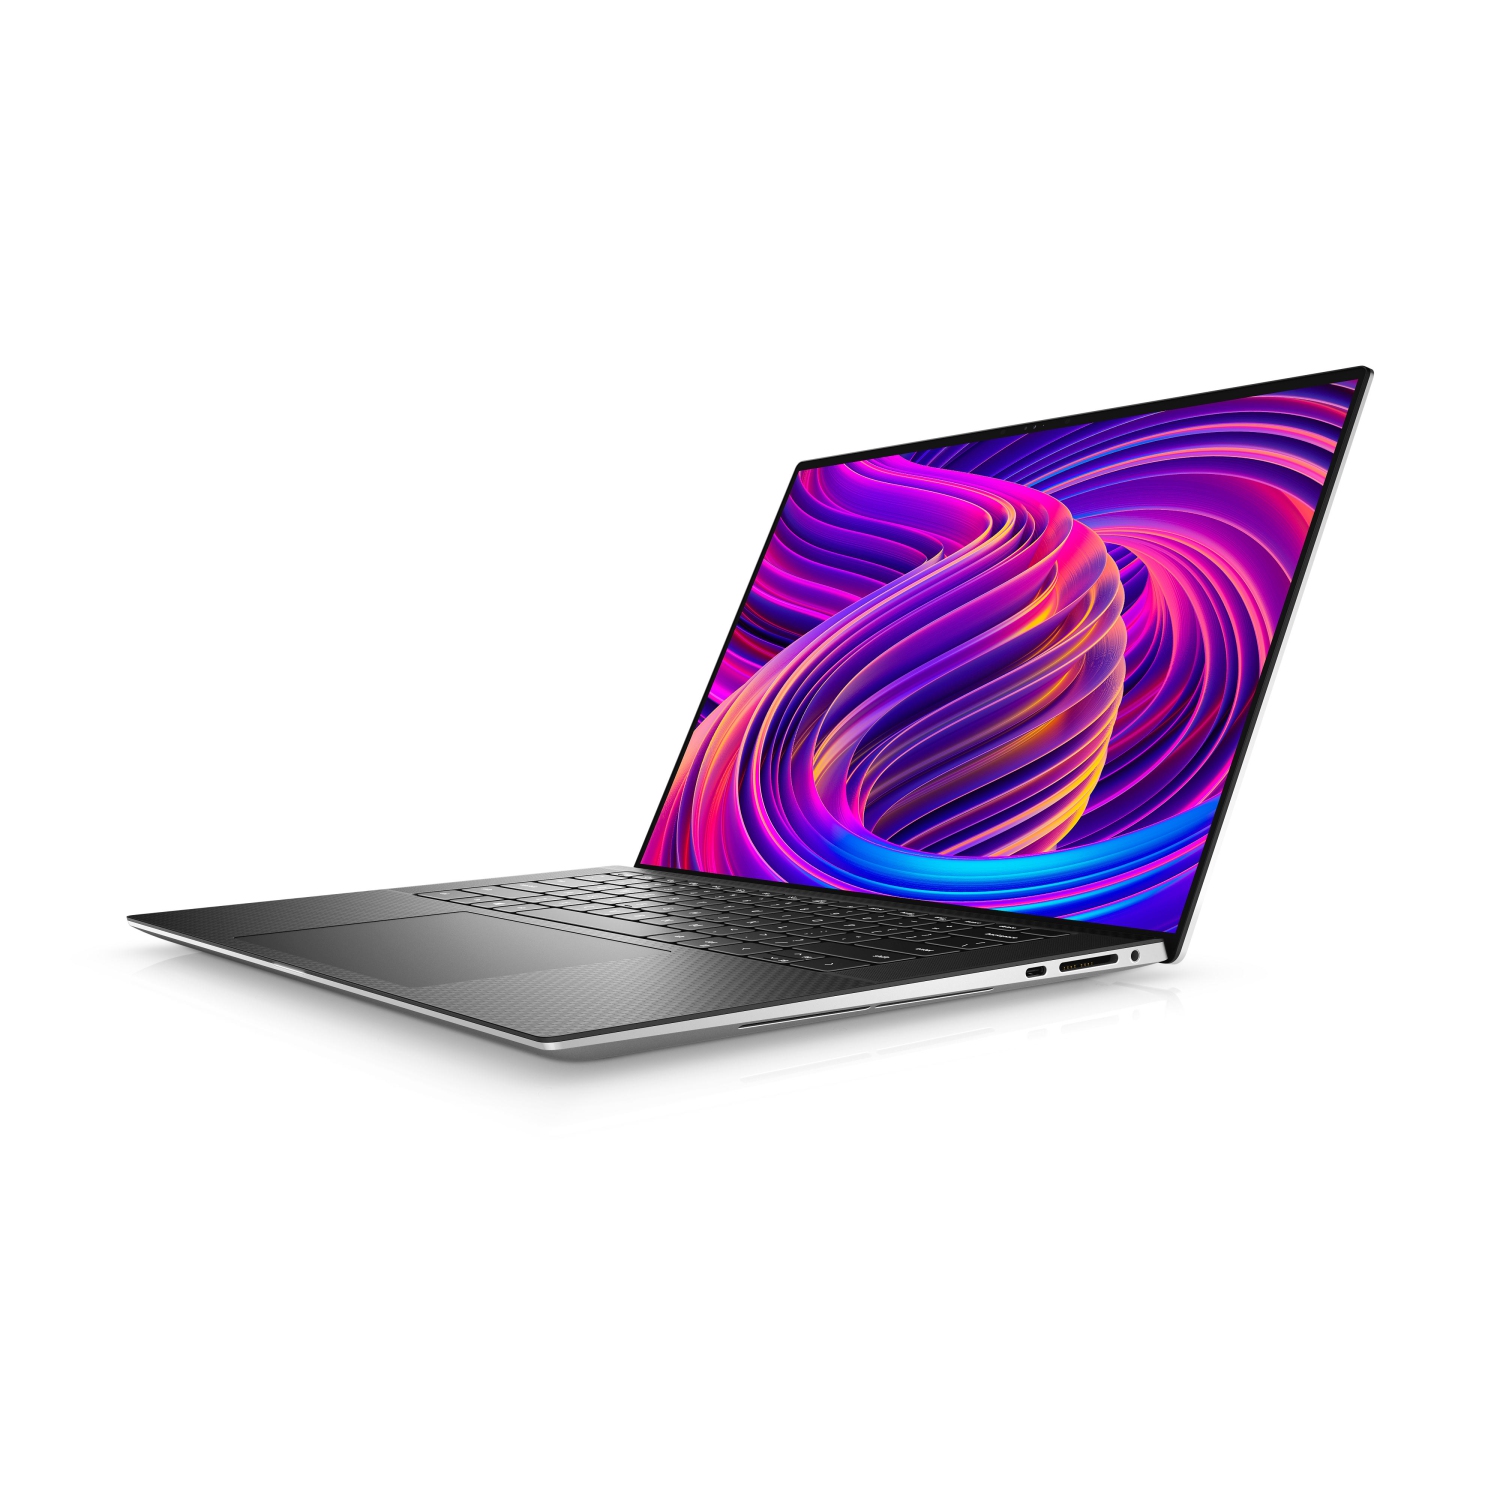 Refurbished (Excellent) - Dell XPS 15 9510 Laptop (2021) | 15.6" FHD+ | Core i9 - 4TB SSD - 64GB RAM - 3050 Ti | 8 Cores @ 4.9 GHz - 11th Gen CPU Certified Refurbished